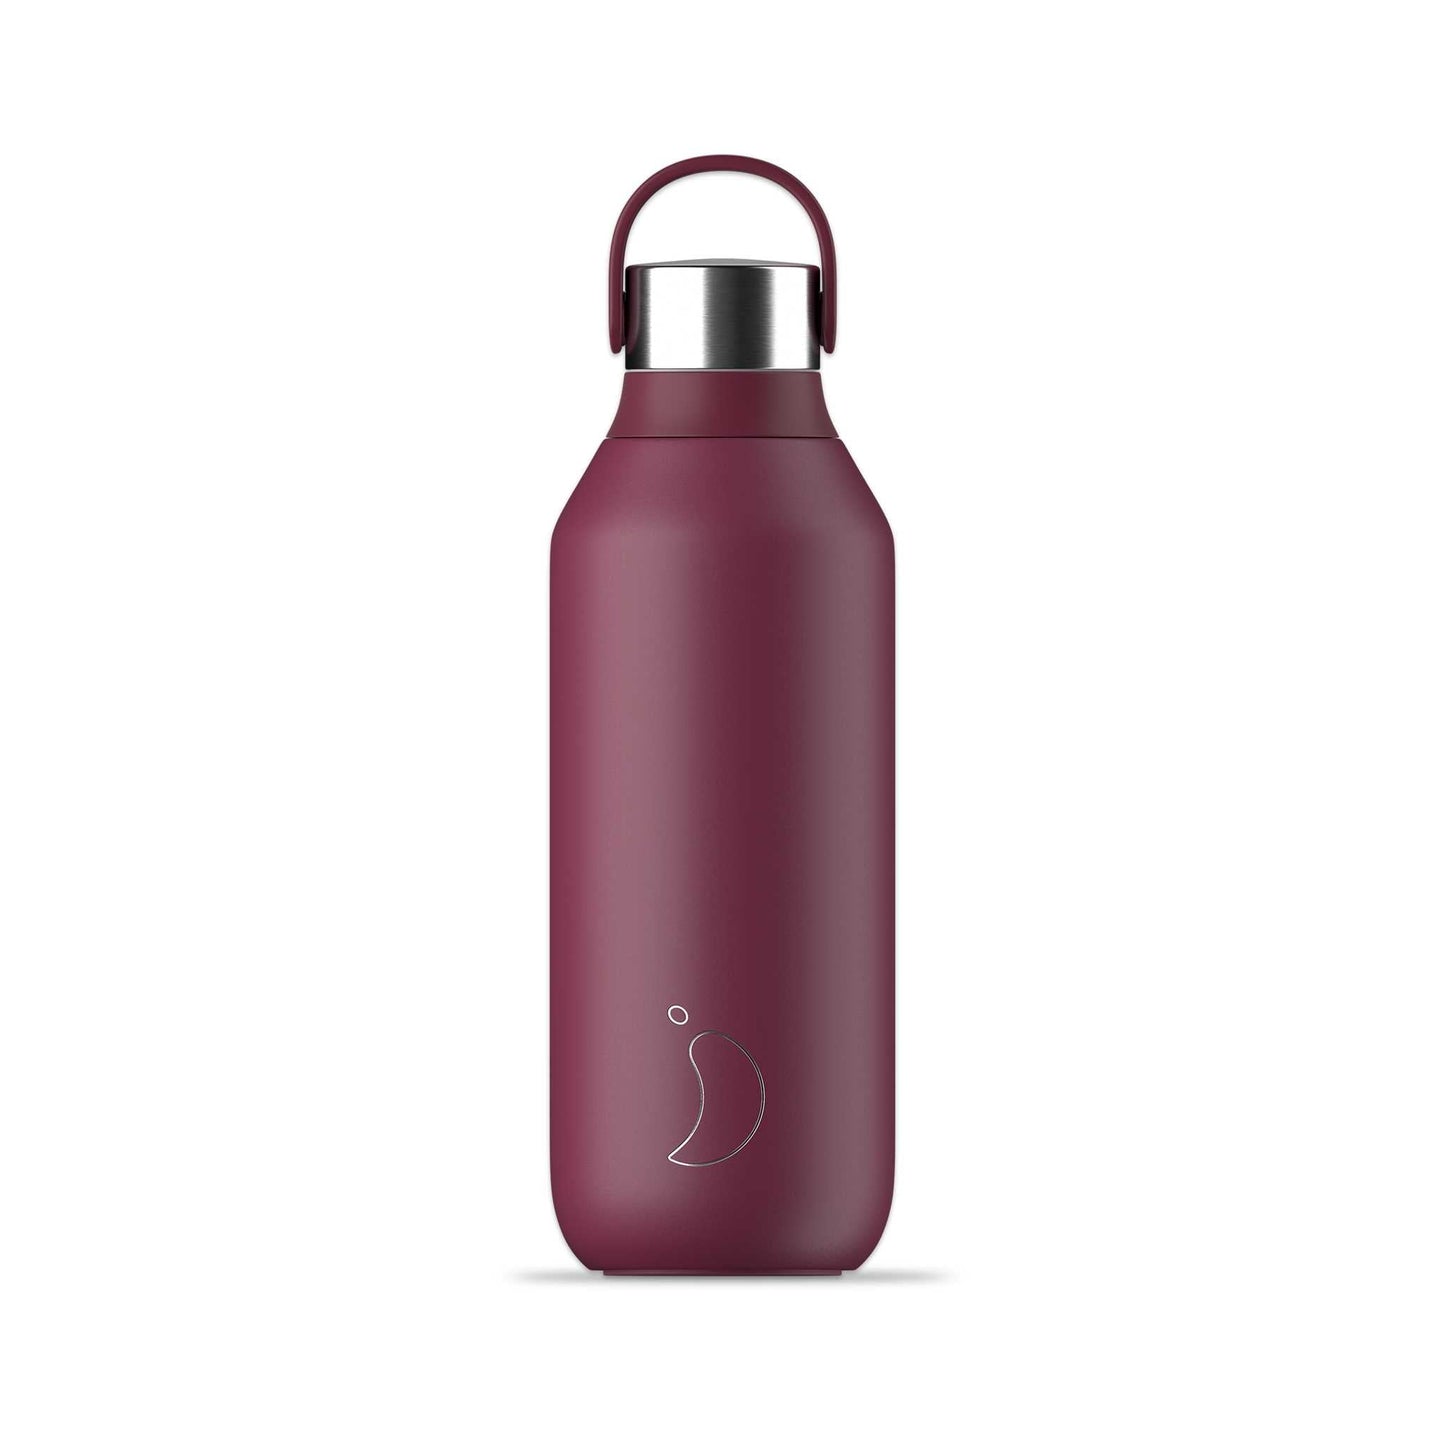 Chilly's Water Bottles Chilly's Series 2 Insulated Drinks Bottle - 500ml - Plum Purple